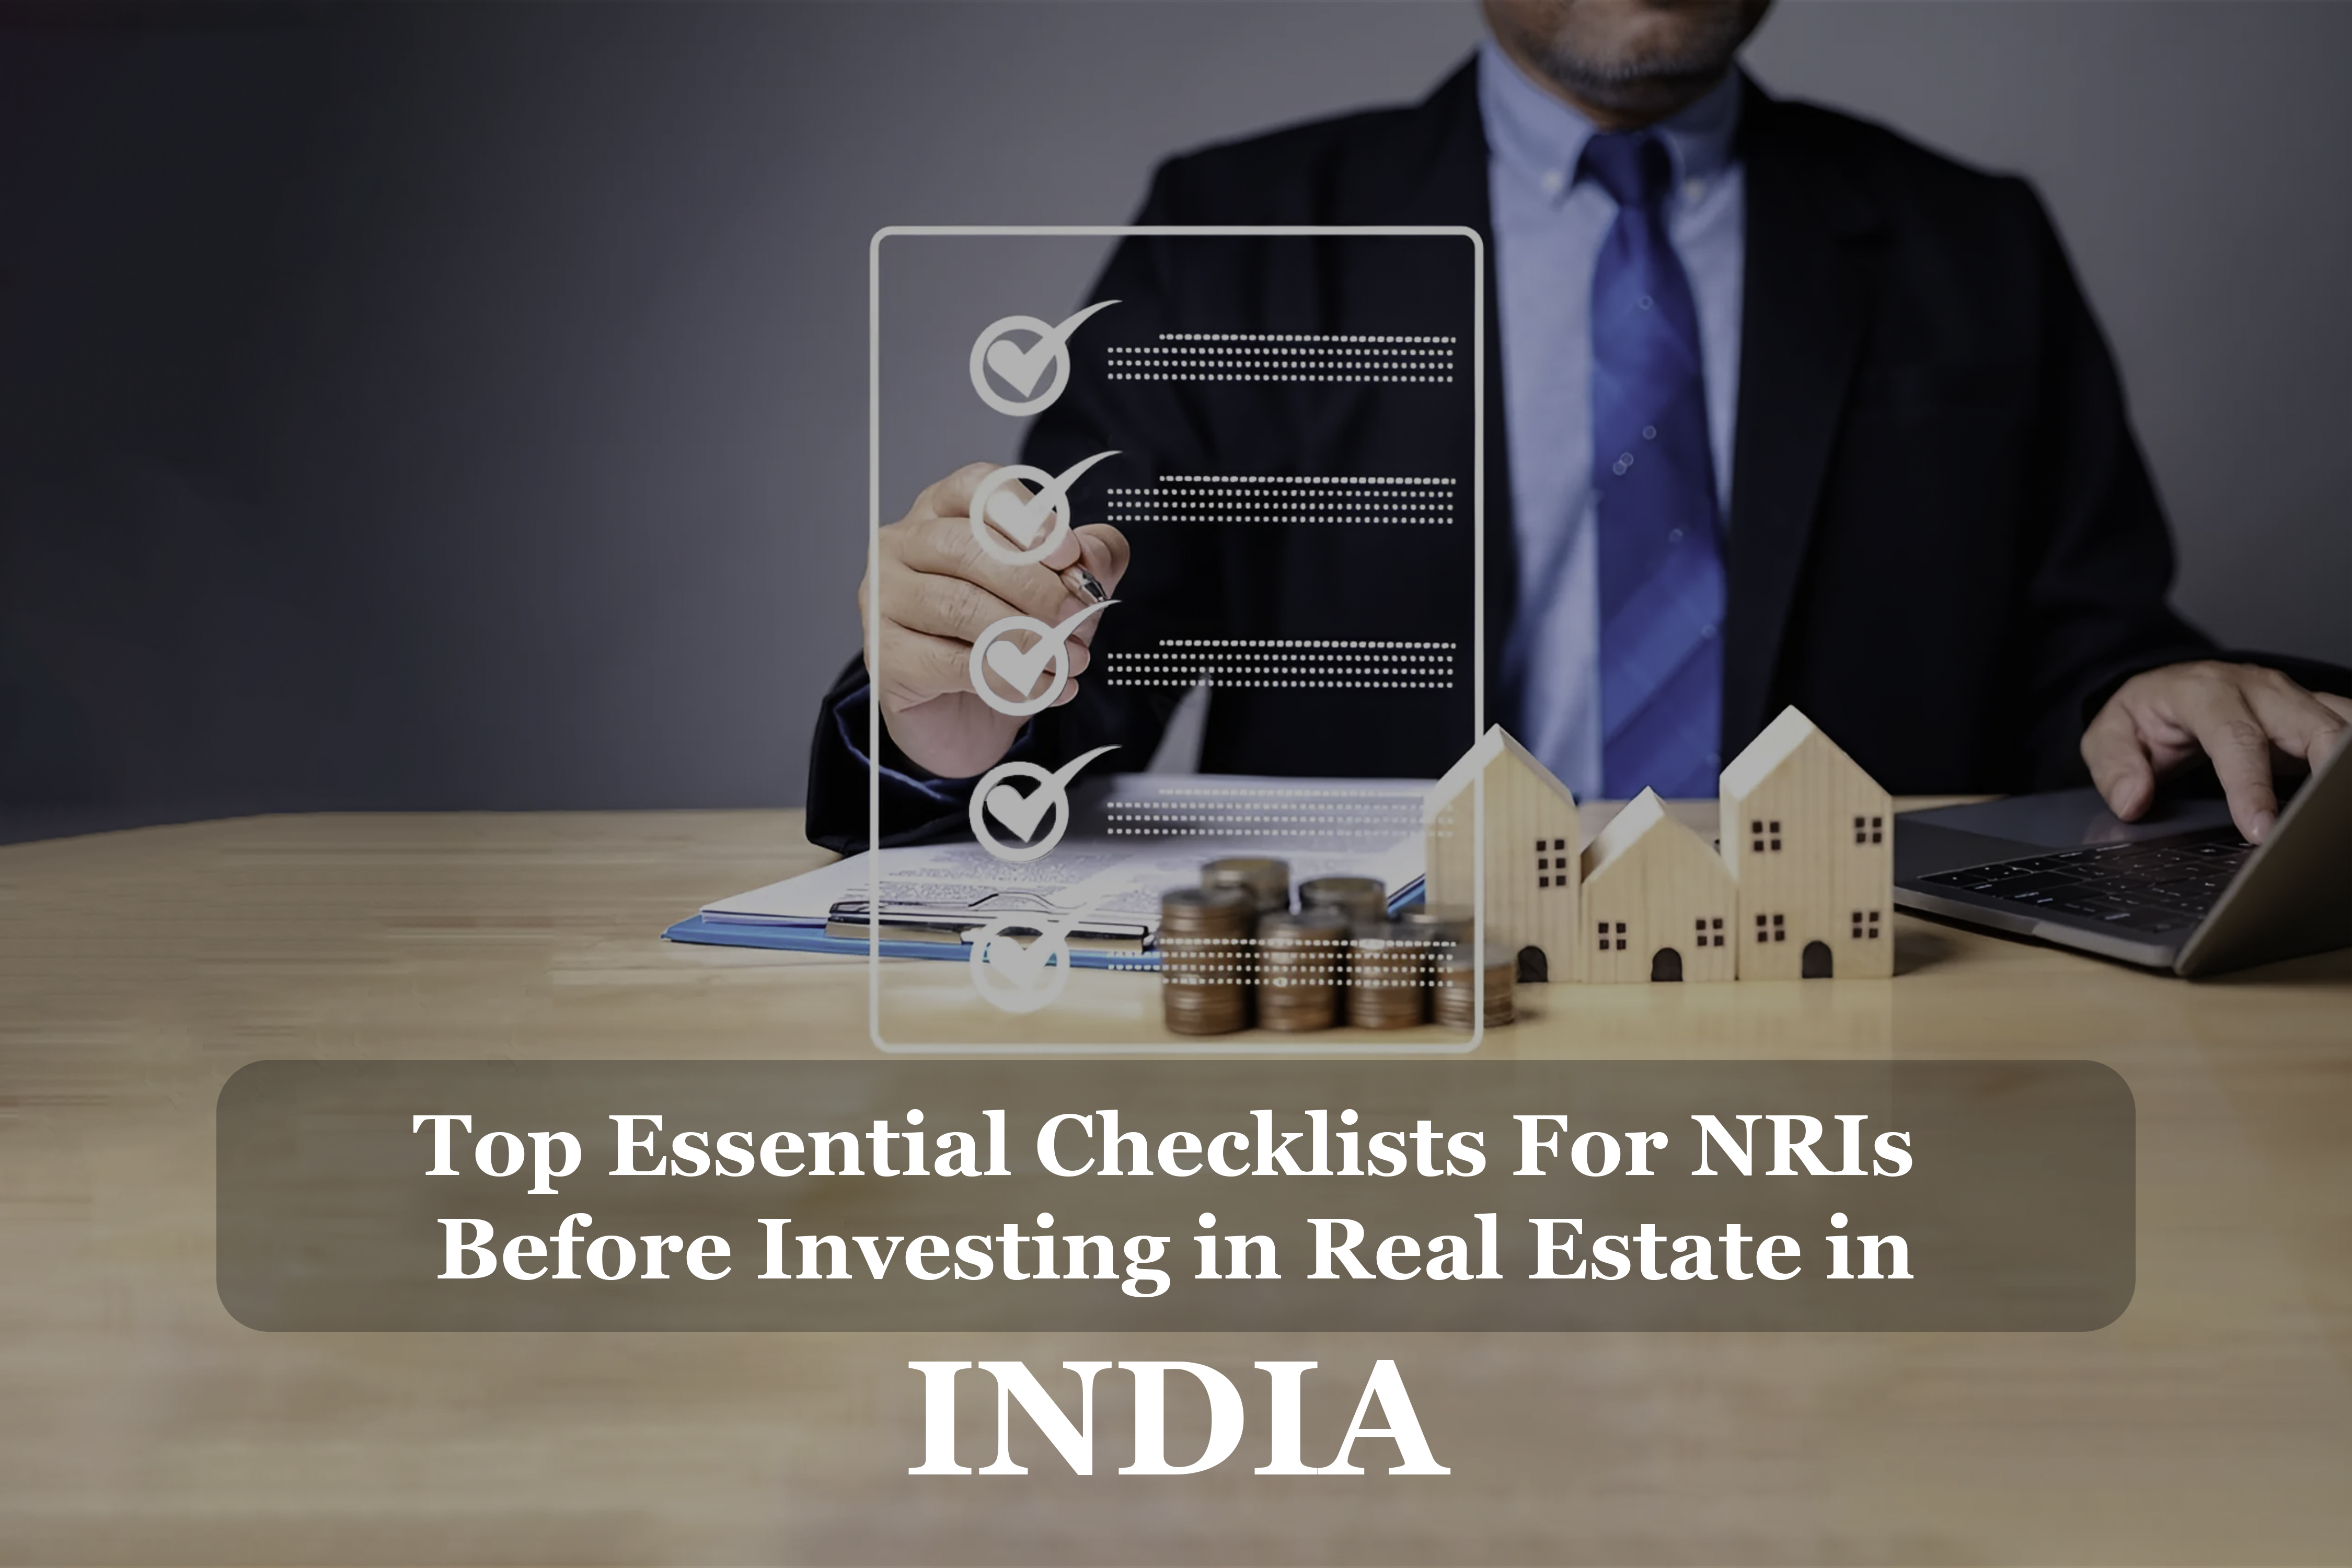 Checklists For NRIs Before Investing in Real Estate in India